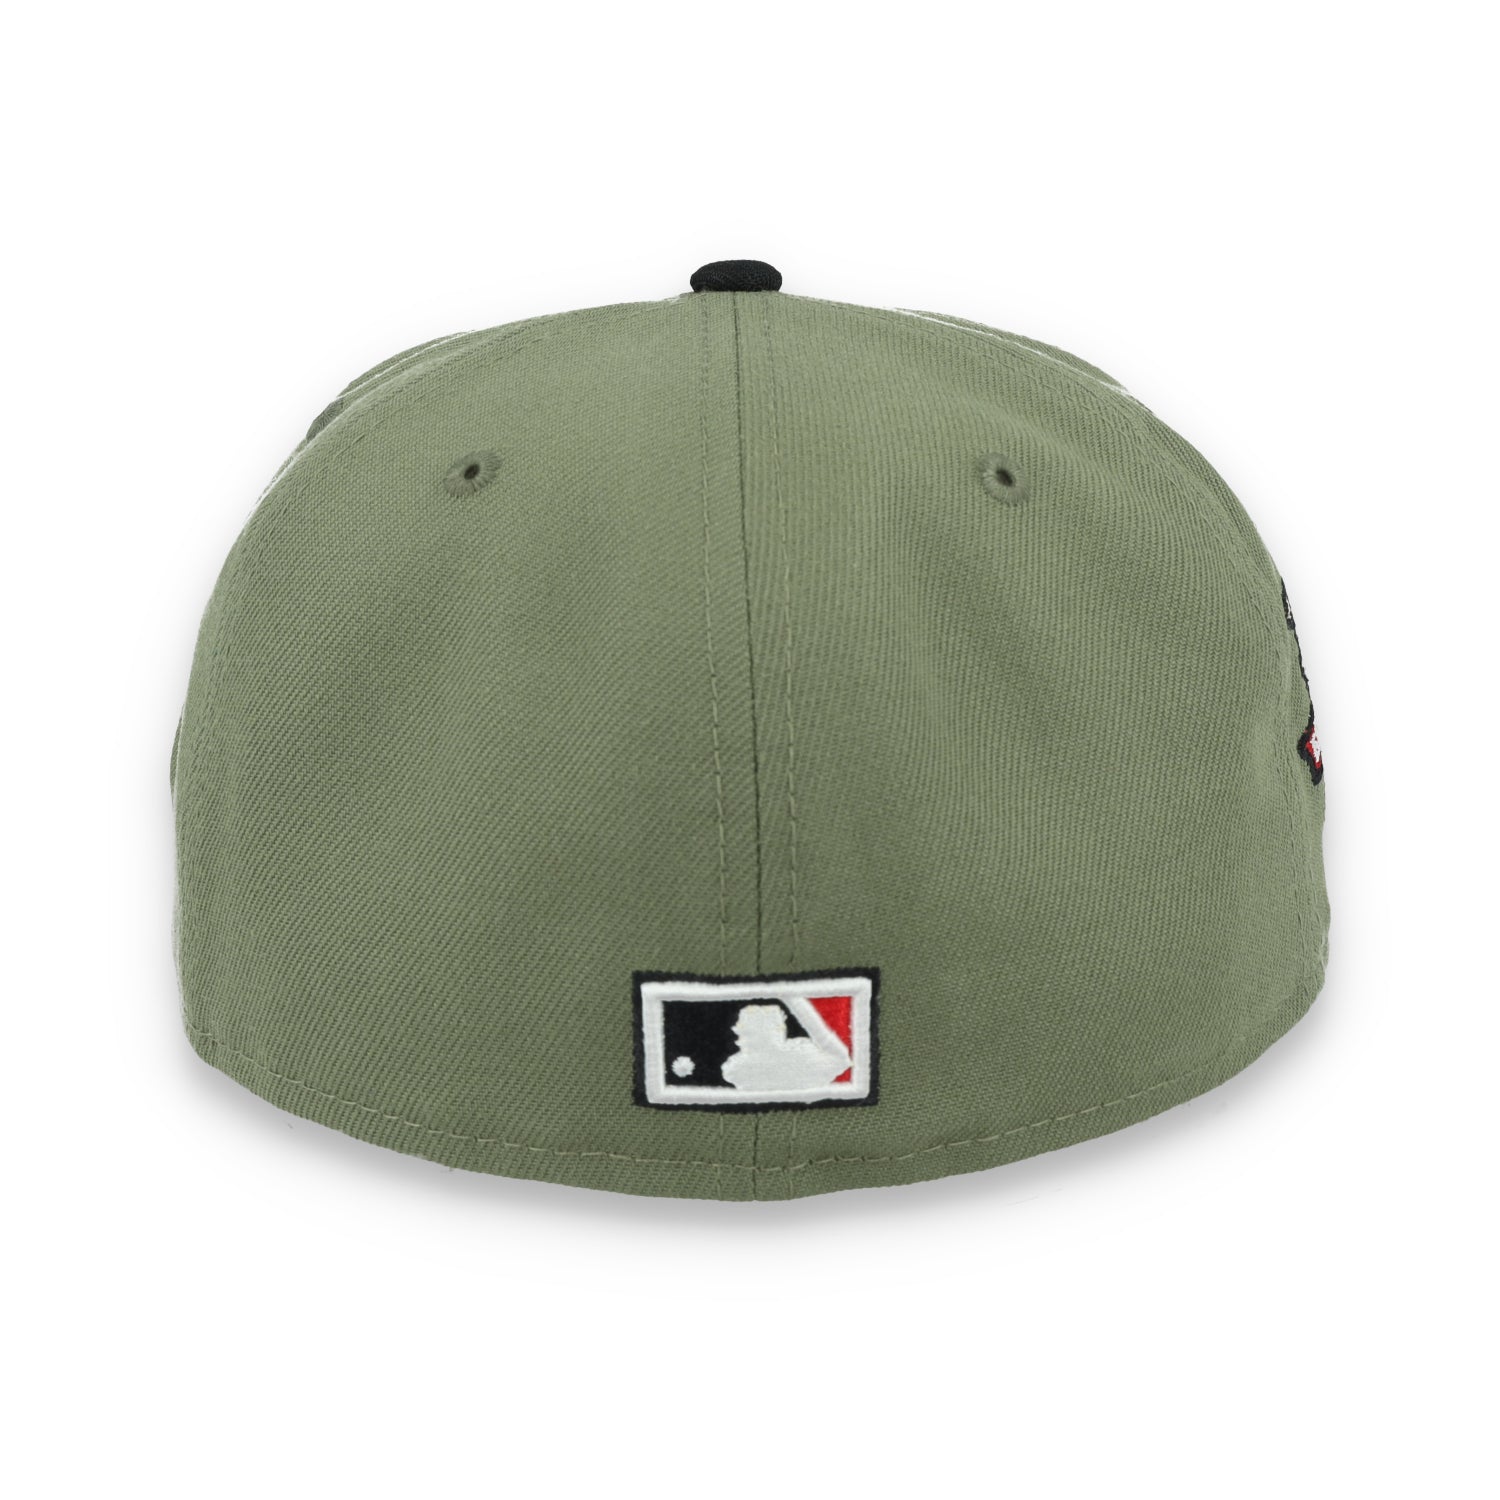 New Era Cincinnati Reds 150th Anniversary Side Patch 59FIFTY Fitted Hat- Olive Green